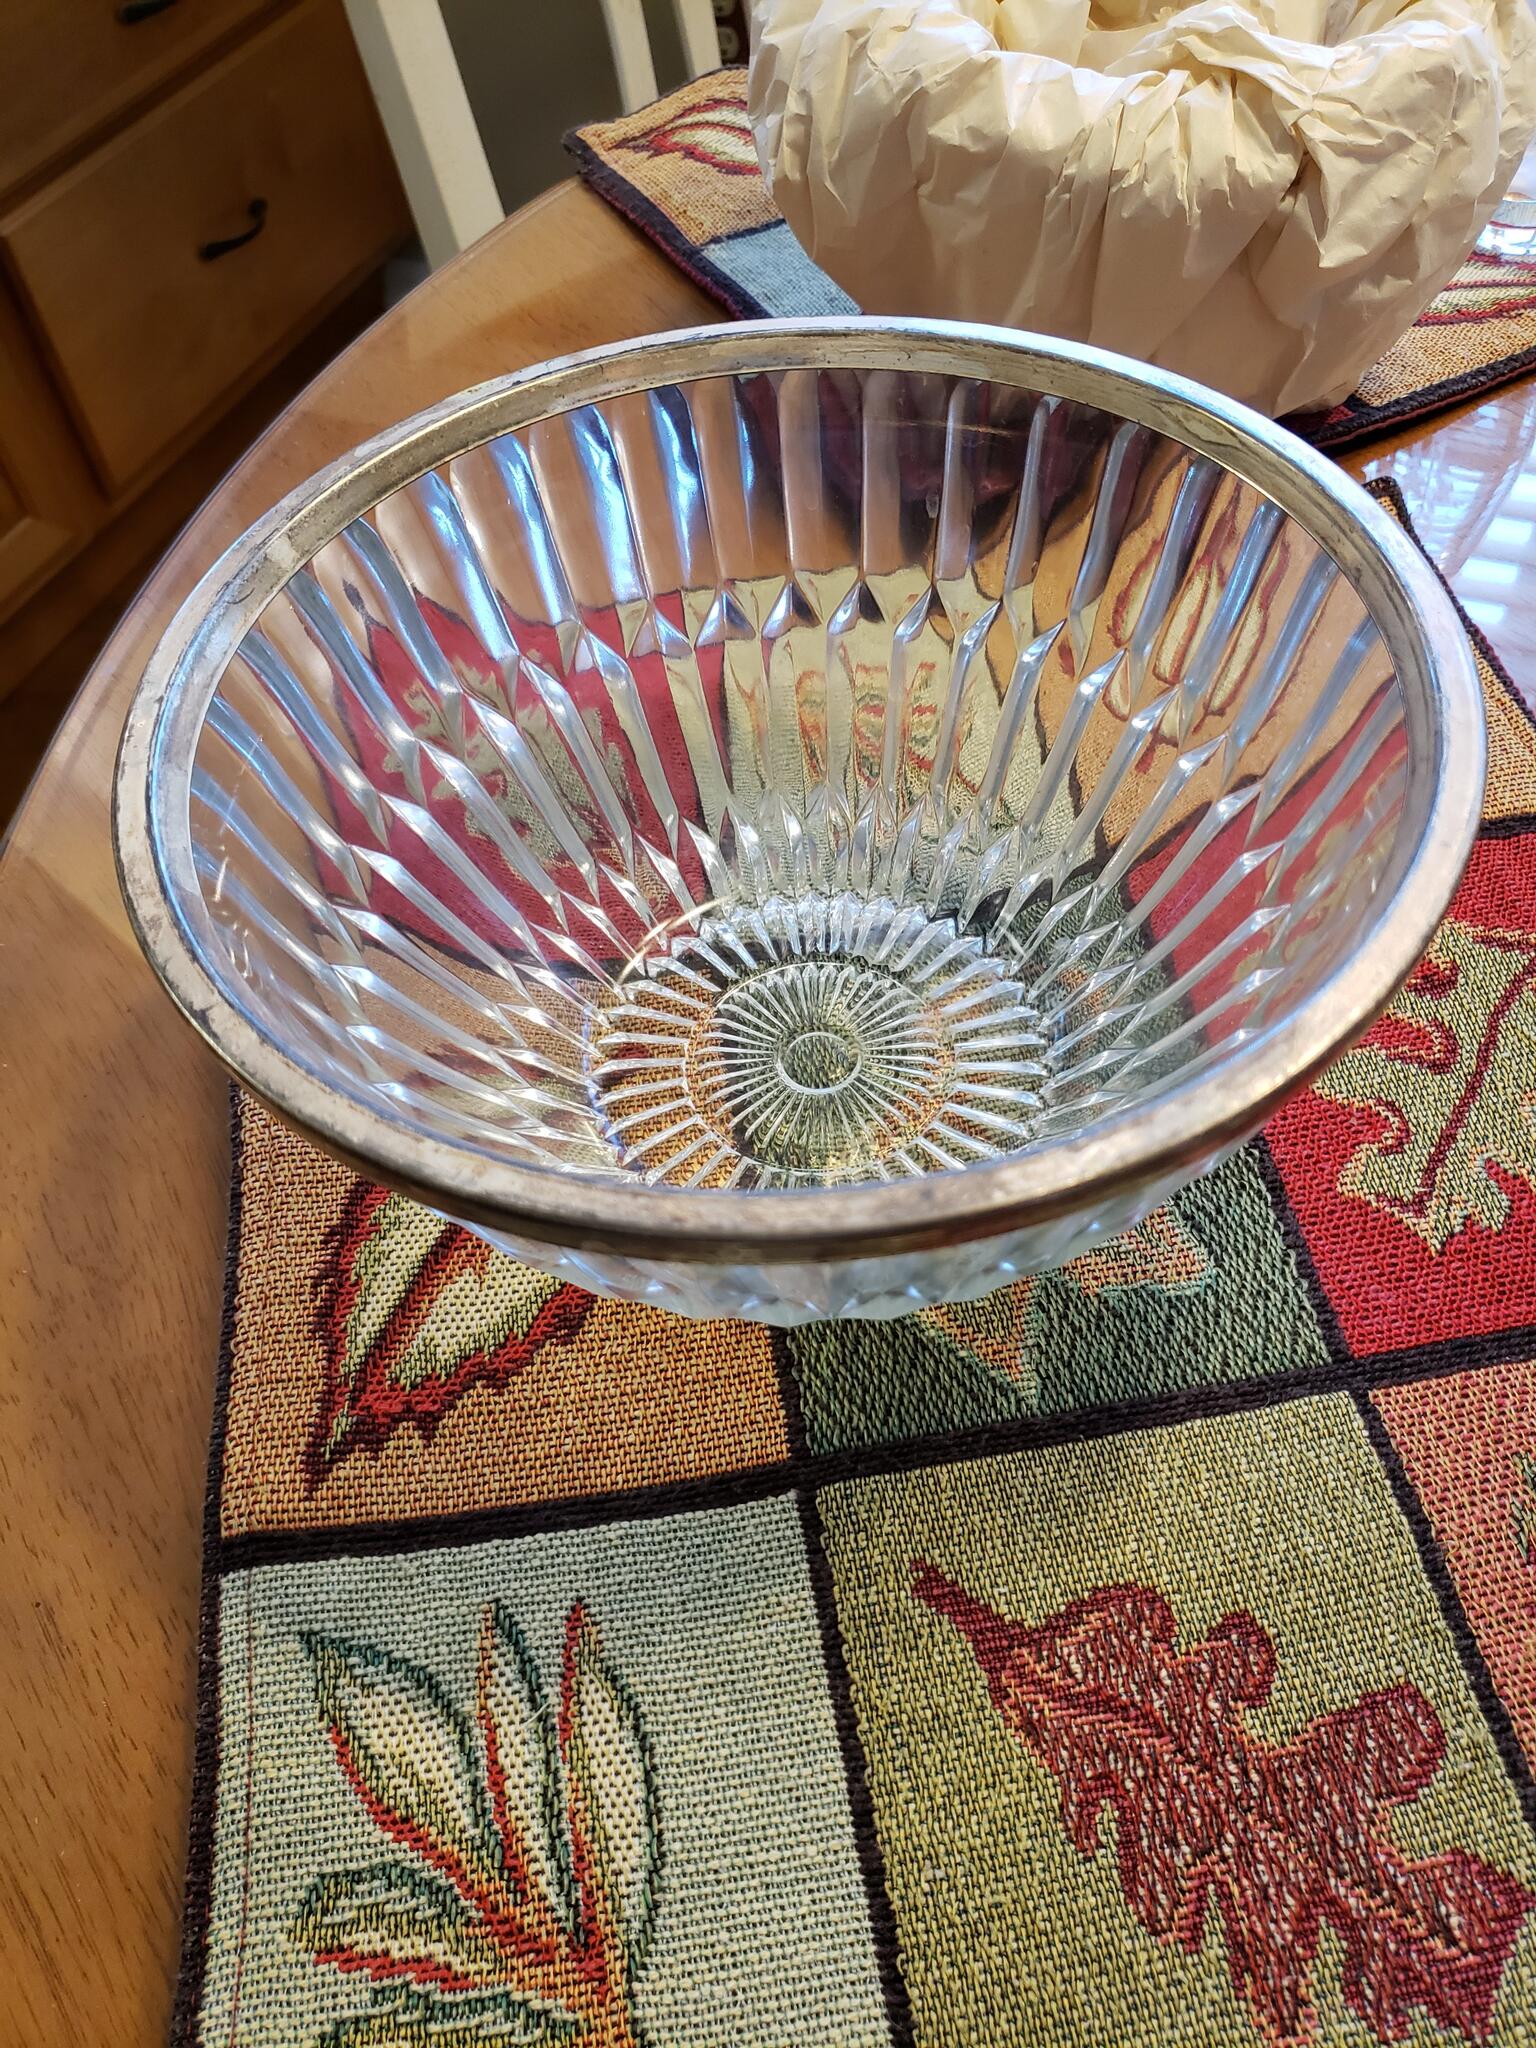 Cut Glass Bowl For $5 In Newtown, PA